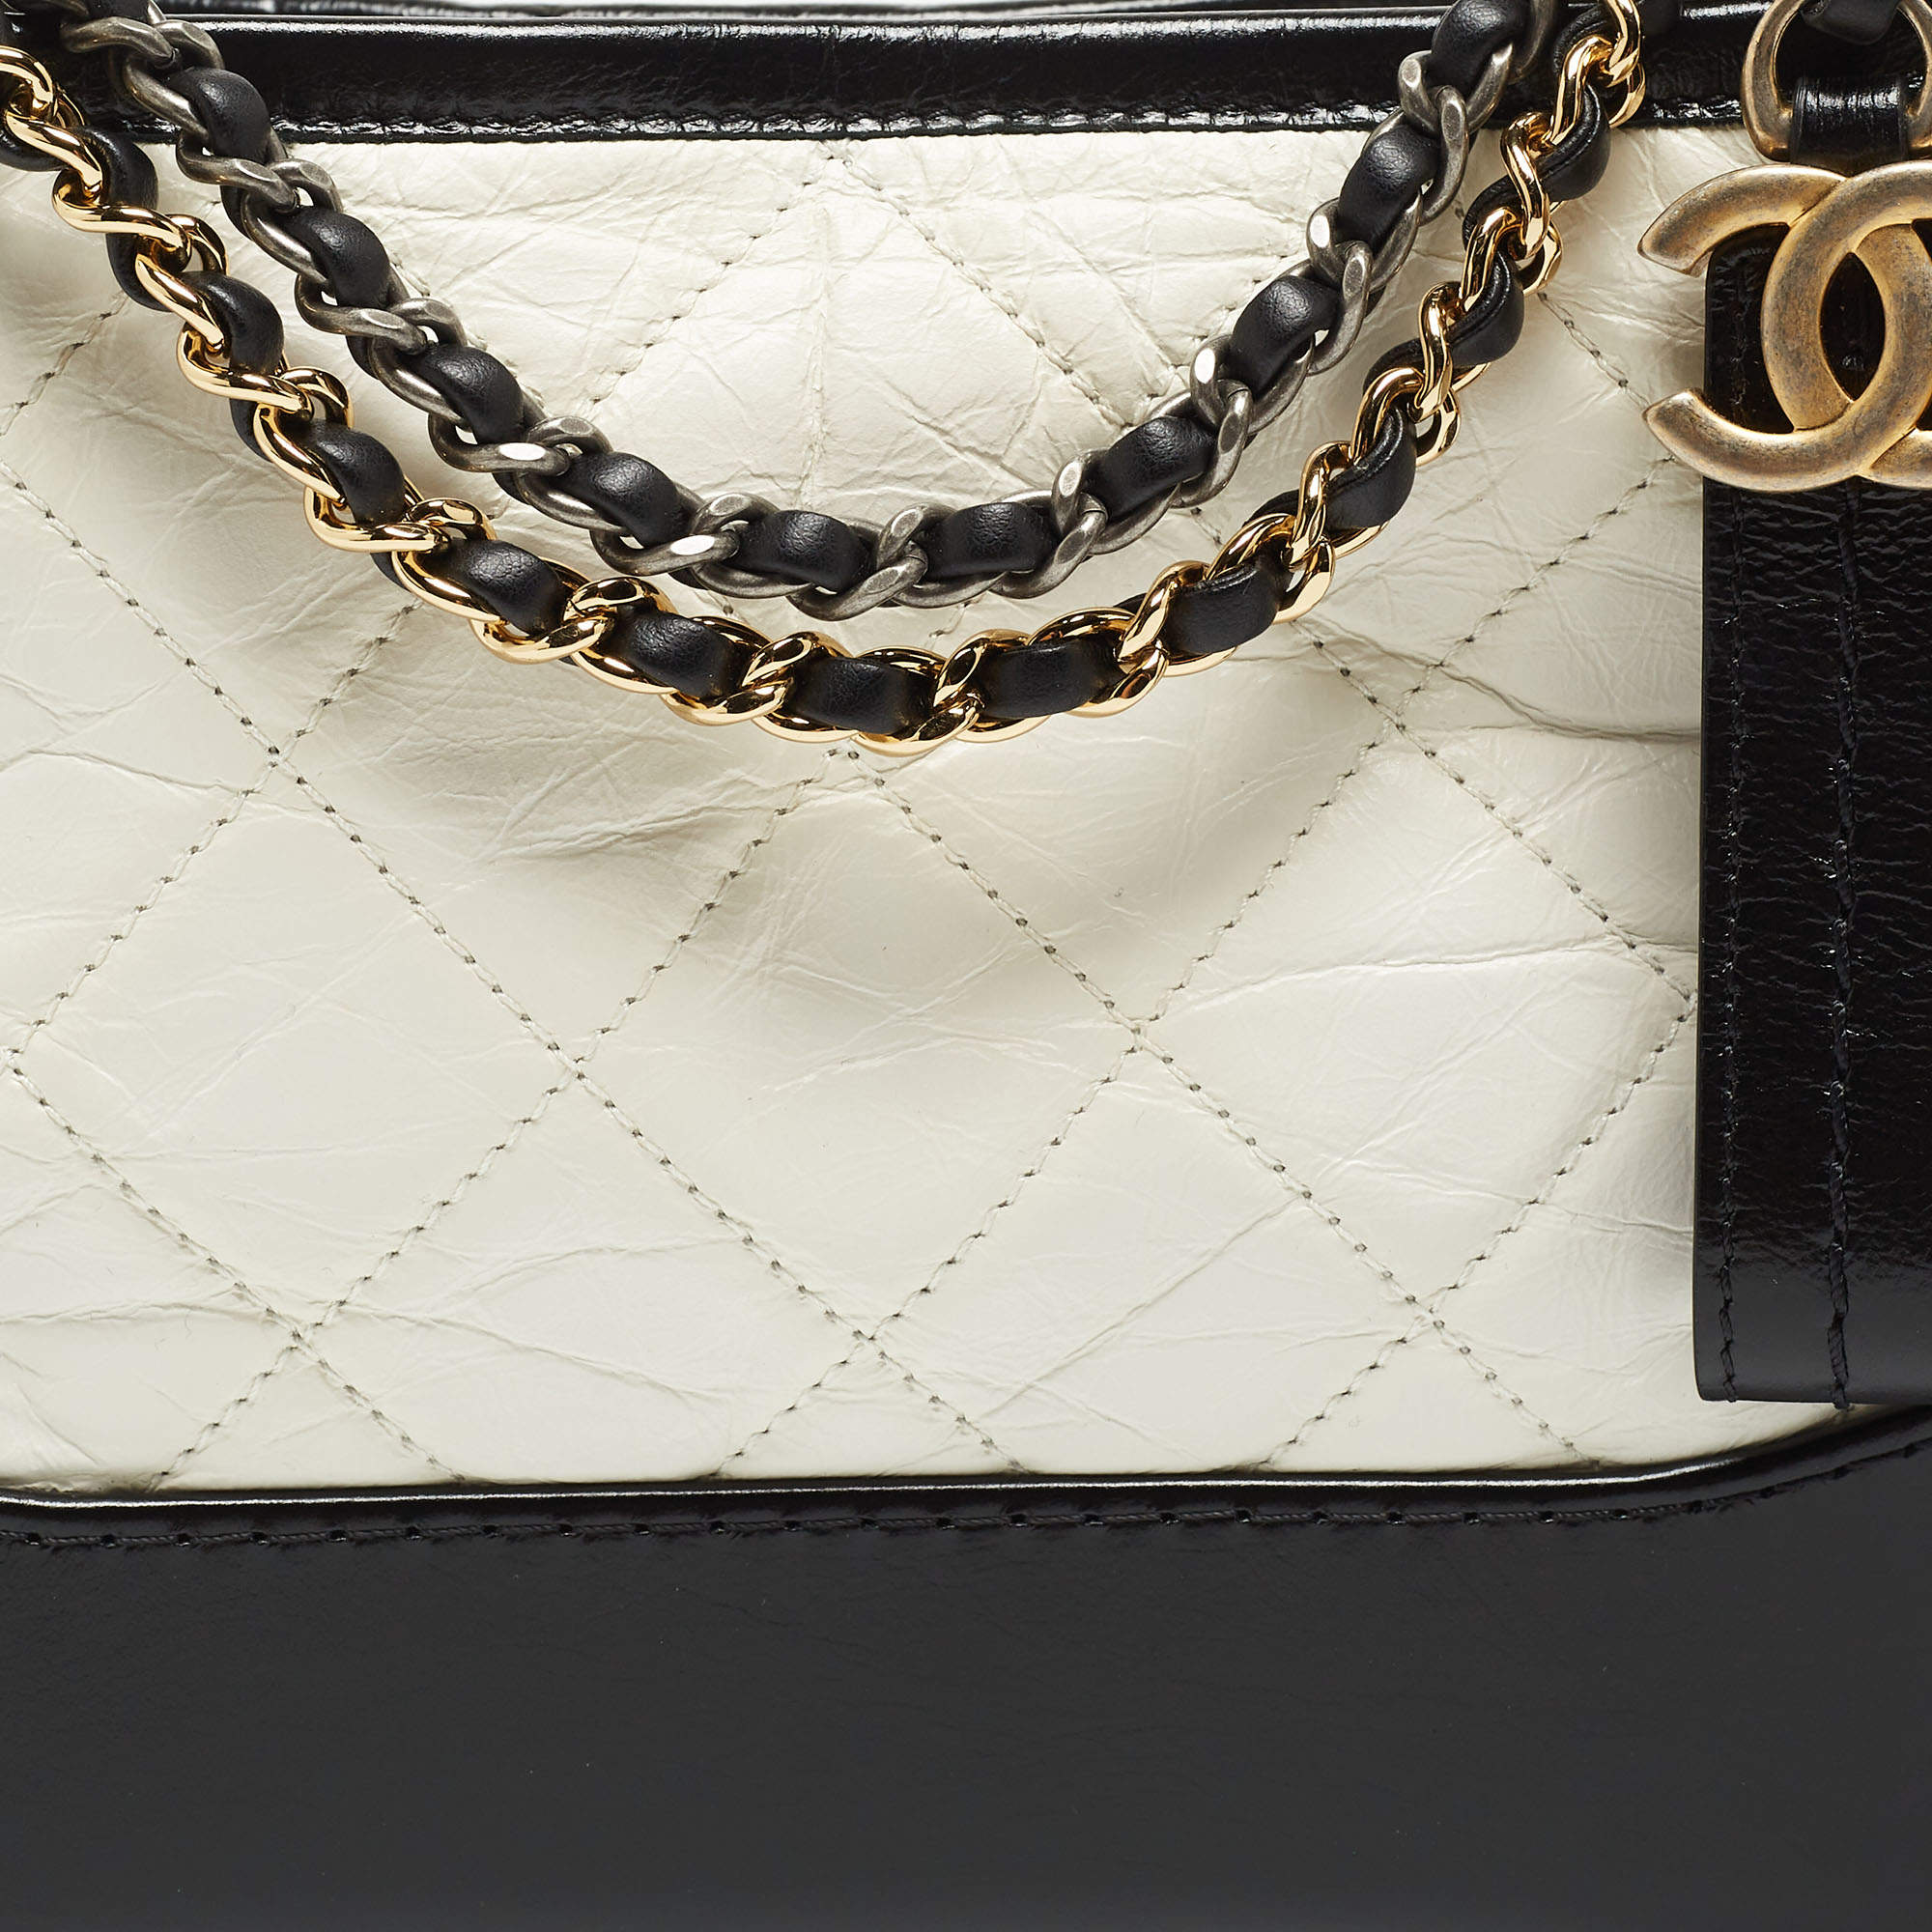 CHANEL Hobo Gabrielle bag in black and white leather - VALOIS